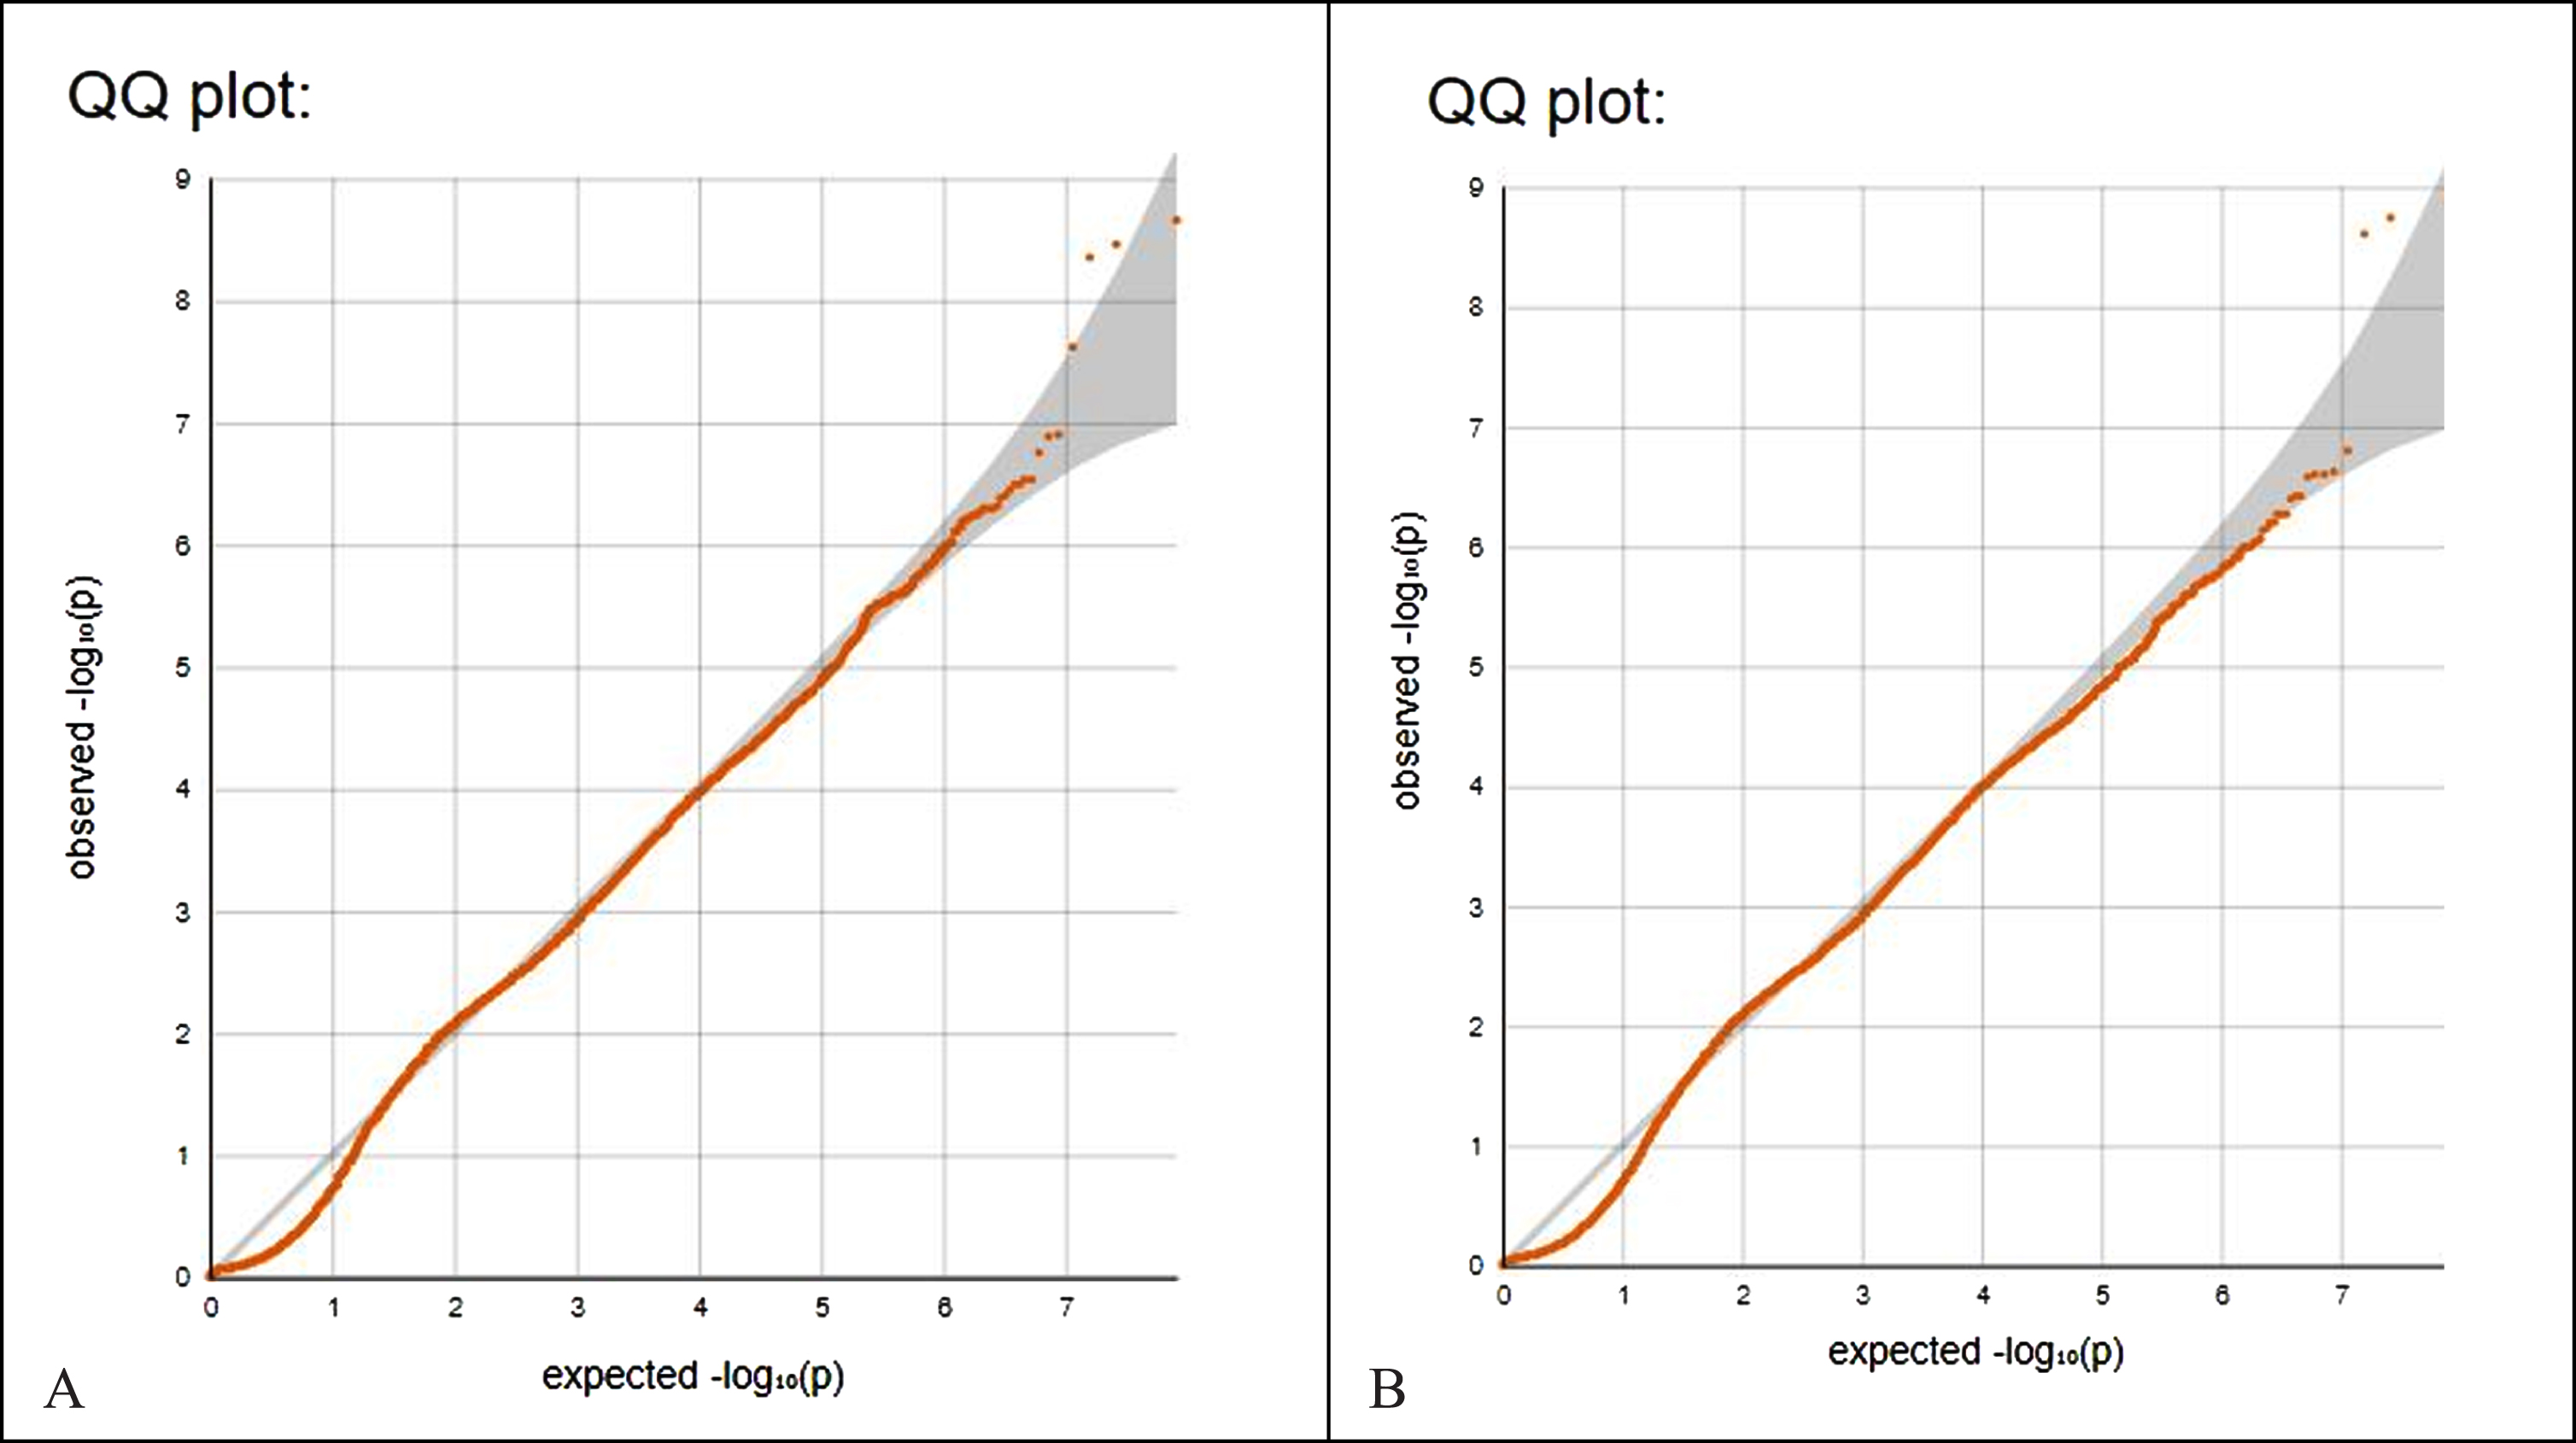 A) QQ plot of p values from encephalitis data (Fig. 1A). Note that the leftmost p-values observed follow a uniform distribution (lower segment of line) but those that are in linkage disequilibrium with causal polymorphisms produce significant p-values (right segment of line). The genomic control inflation factor lambda, calculation based on the 50th percentile (median), is 0.205. Values up to 1.1 are generally considered acceptable for GWAS and suggest no systematic biases. B) QQ plot of p values from non-infectious encephalitis data (Fig. 1B, lambda 0.188).